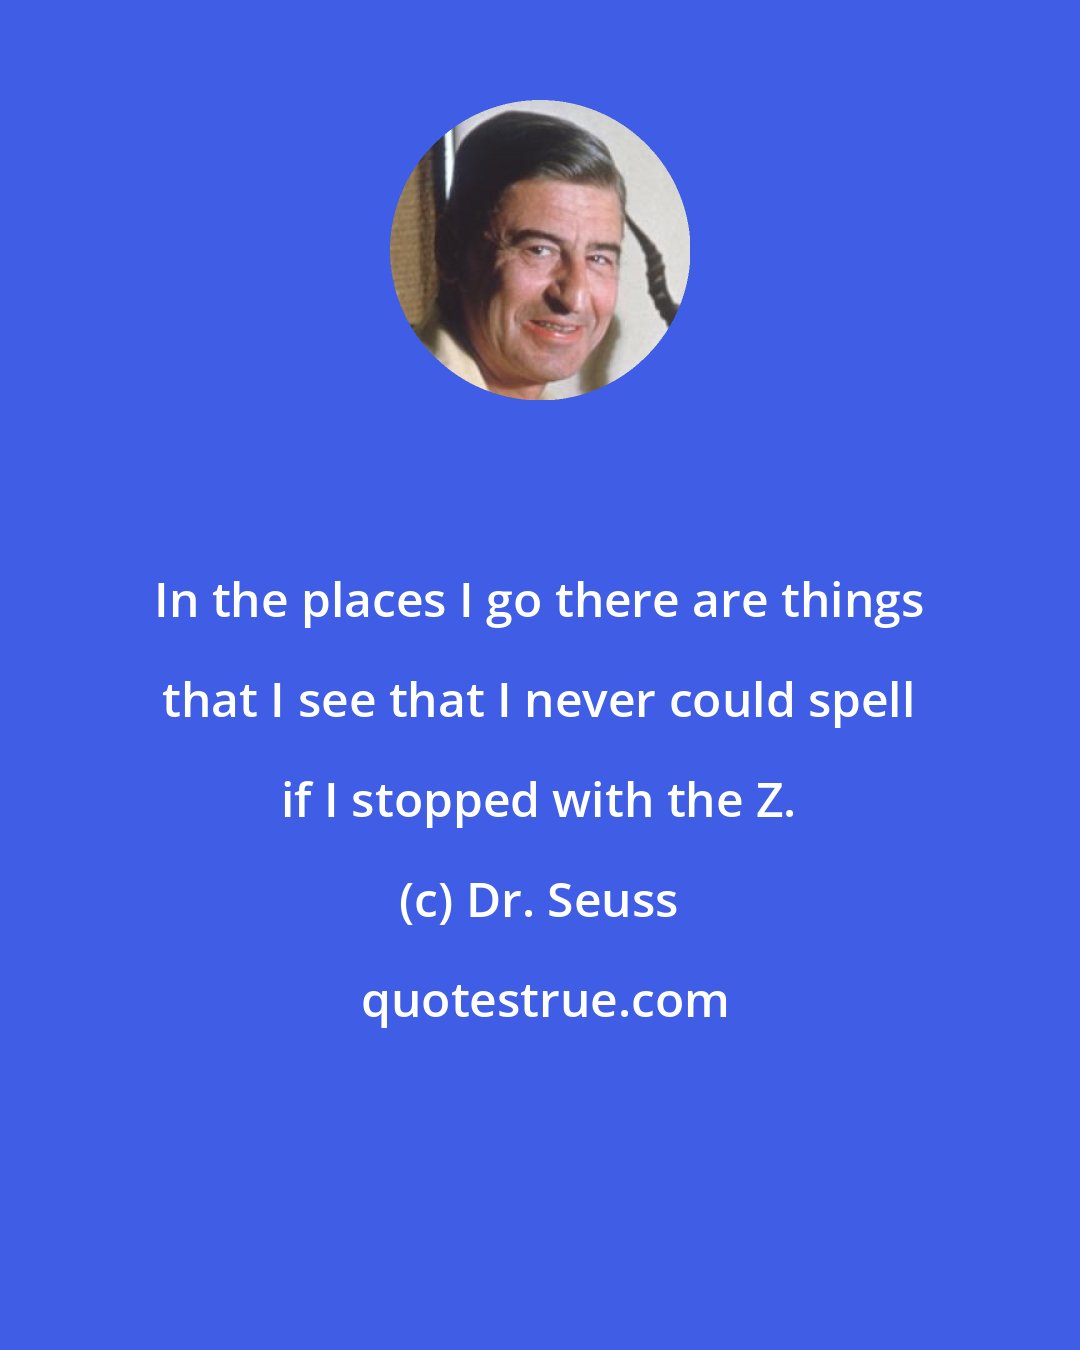 Dr. Seuss: In the places I go there are things that I see that I never could spell if I stopped with the Z.